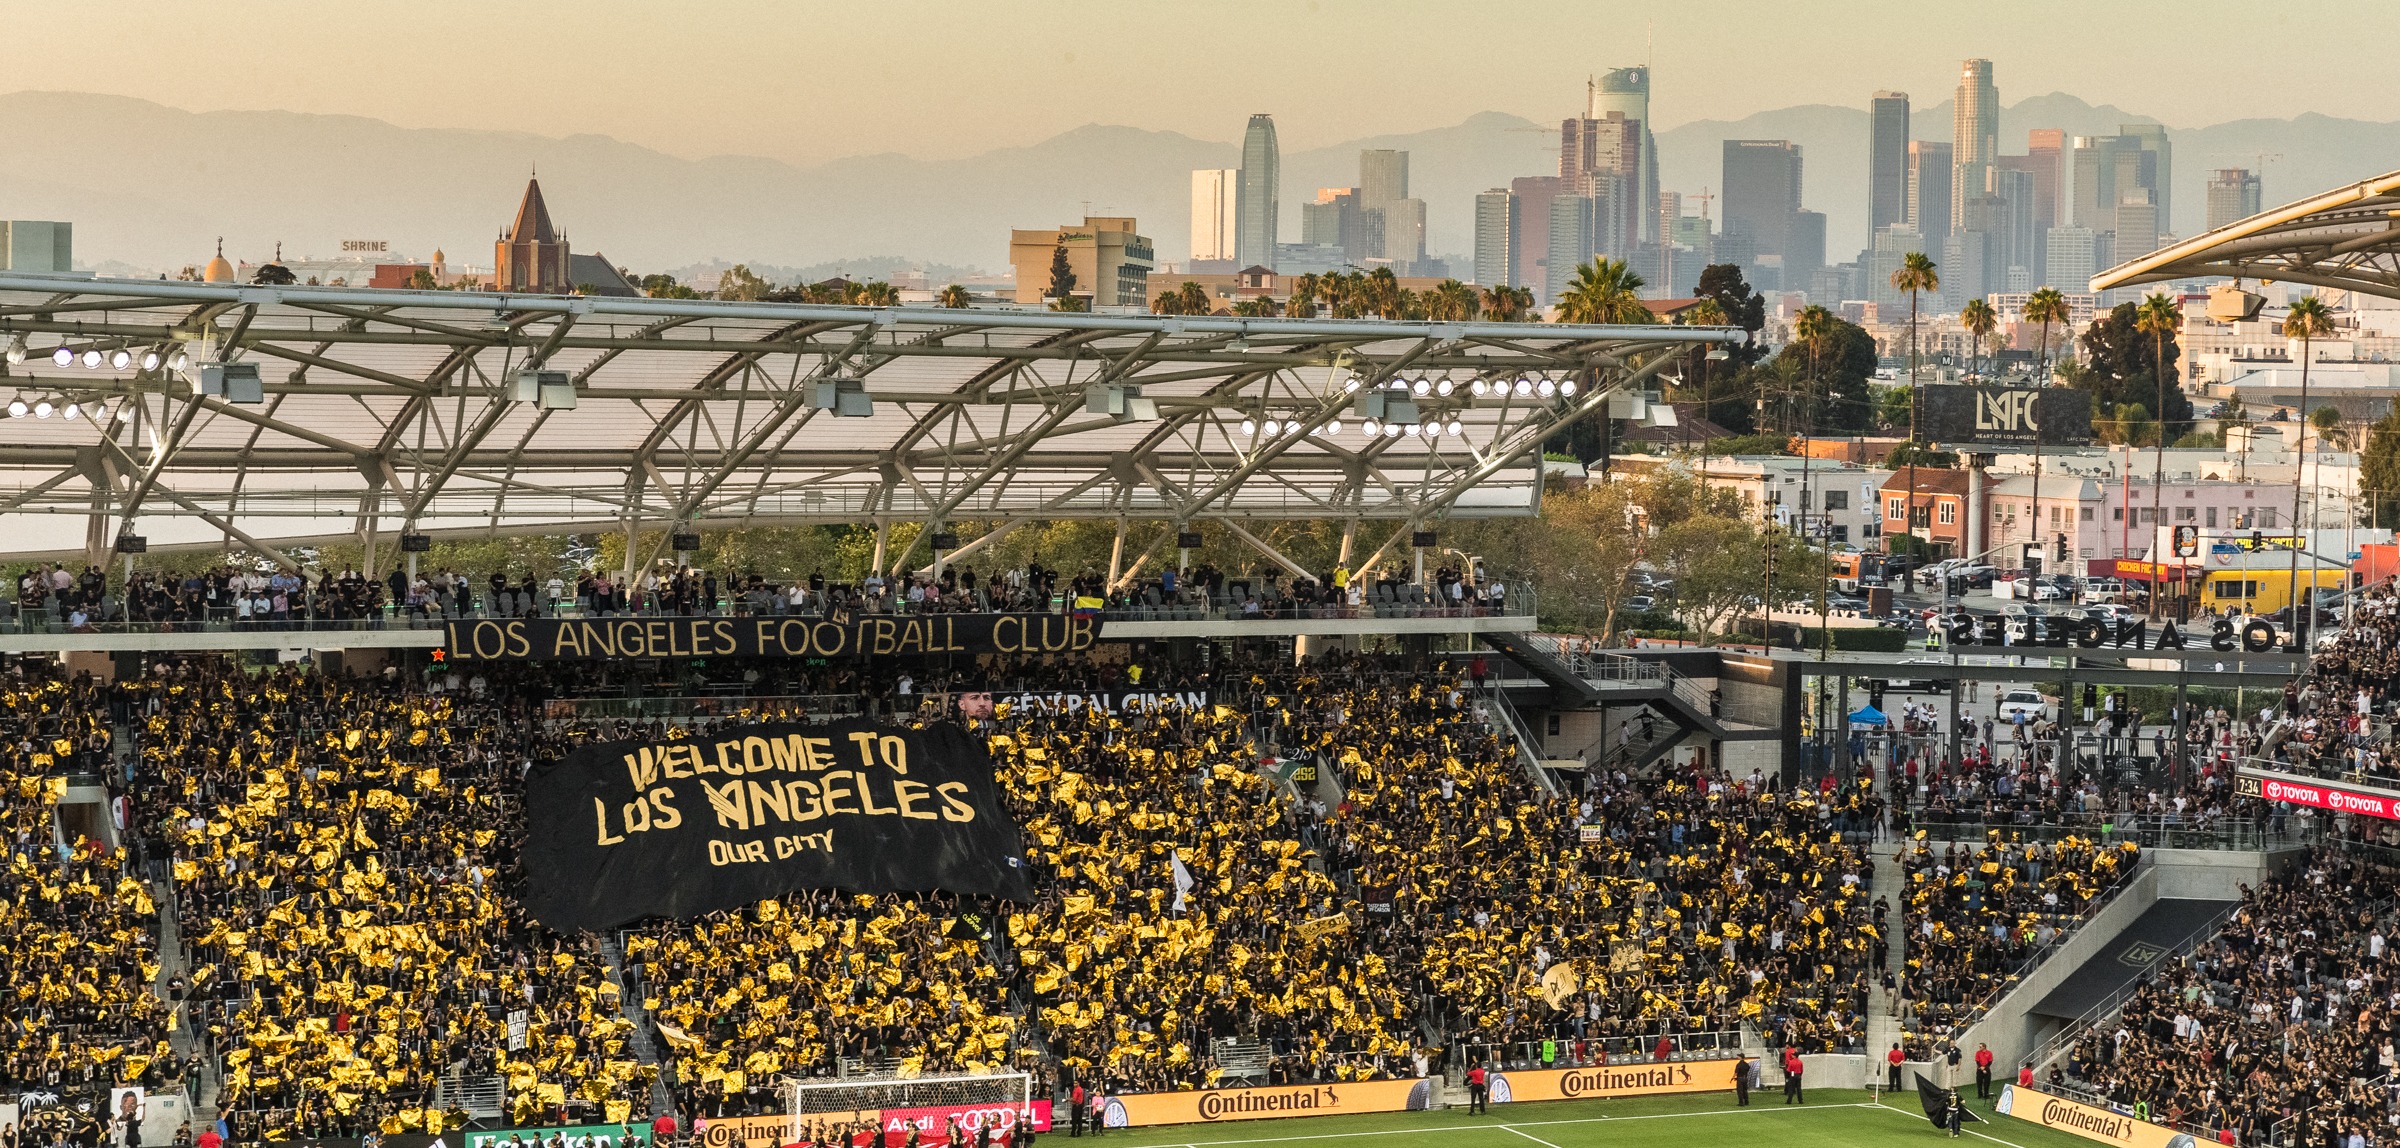 LAFC Partners With Satisfi Labs To Launch In-Stadium Order-Ahead